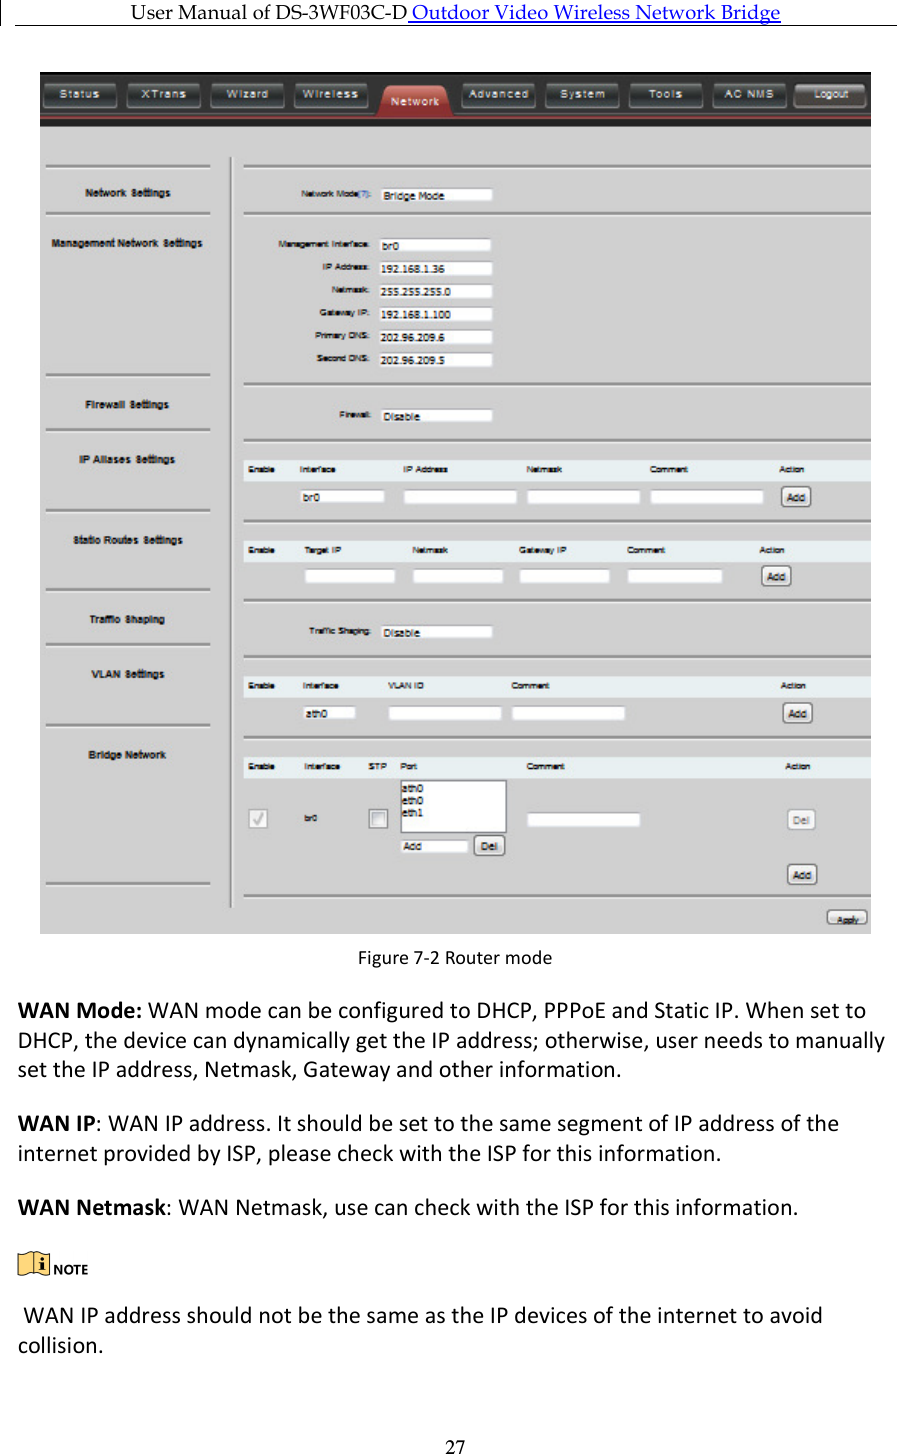 User Manual of DS-3WF03C-D Outdoor Video Wireless Network Bridge      27 Figure 7-2 Router mode WAN Mode: WAN mode can be configured to DHCP, PPPoE and Static IP. When set to DHCP, the device can dynamically get the IP address; otherwise, user needs to manually set the IP address, Netmask, Gateway and other information. WAN IP: WAN IP address. It should be set to the same segment of IP address of the internet provided by ISP, please check with the ISP for this information. WAN Netmask: WAN Netmask, use can check with the ISP for this information.   WAN IP address should not be the same as the IP devices of the internet to avoid collision. 